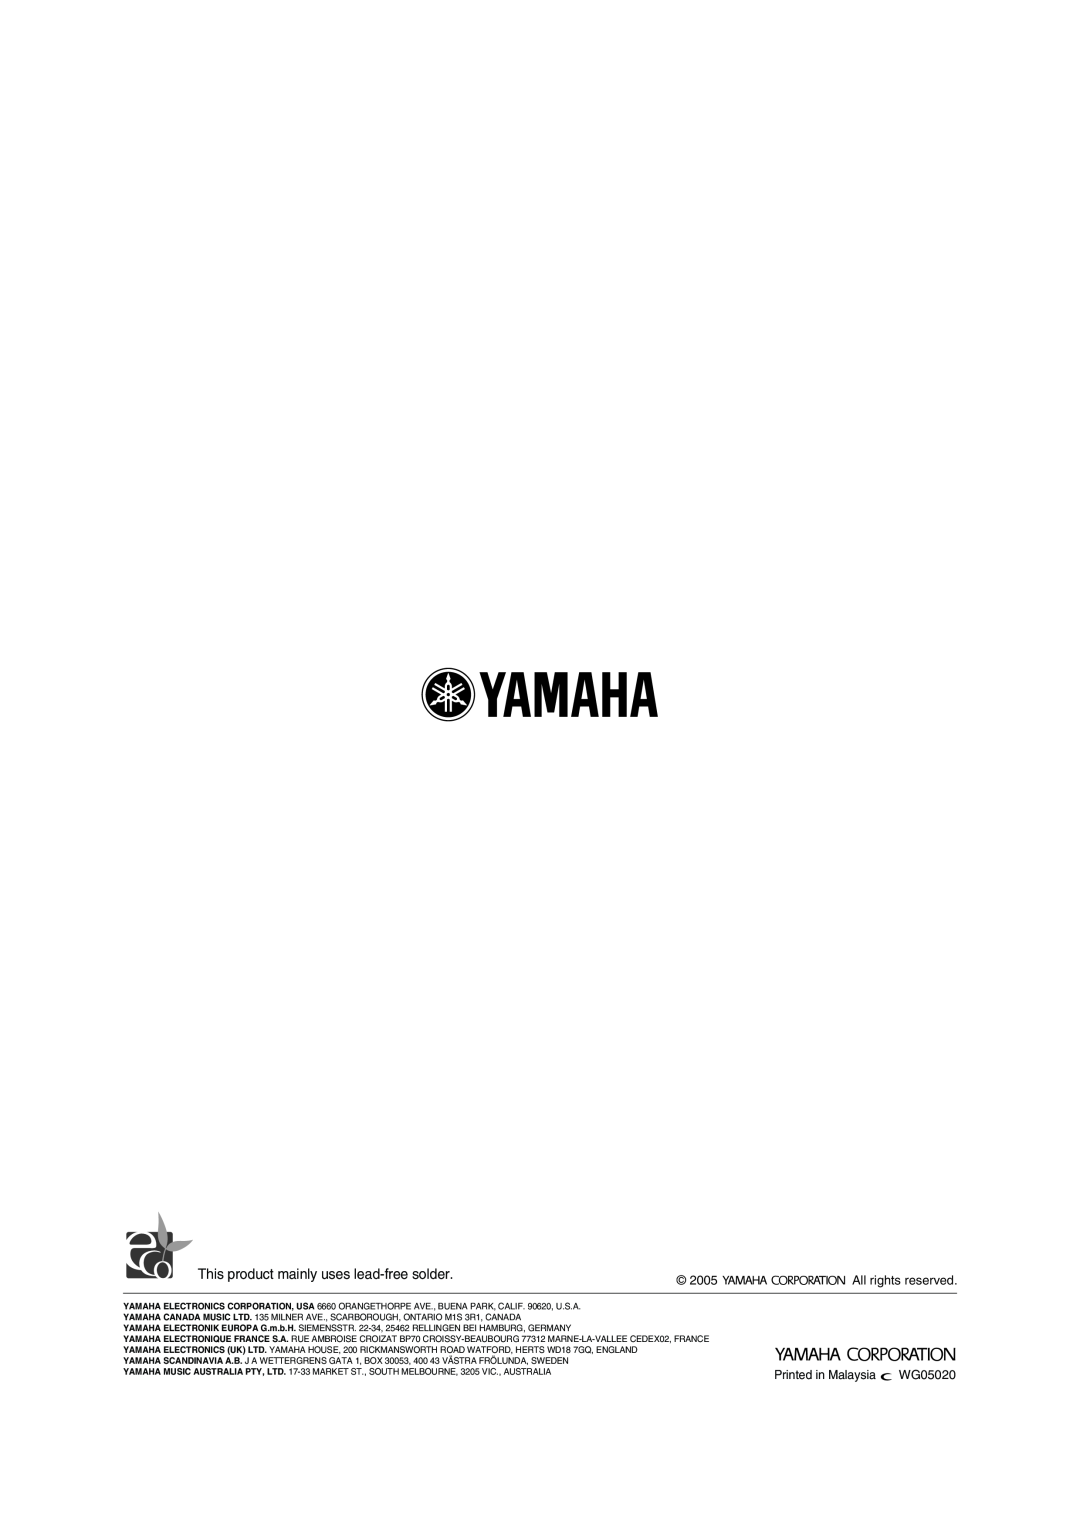 Yamaha RX-497 owner manual This product mainly uses lead-freesolder, 2005, WG05020, All rights reserved 